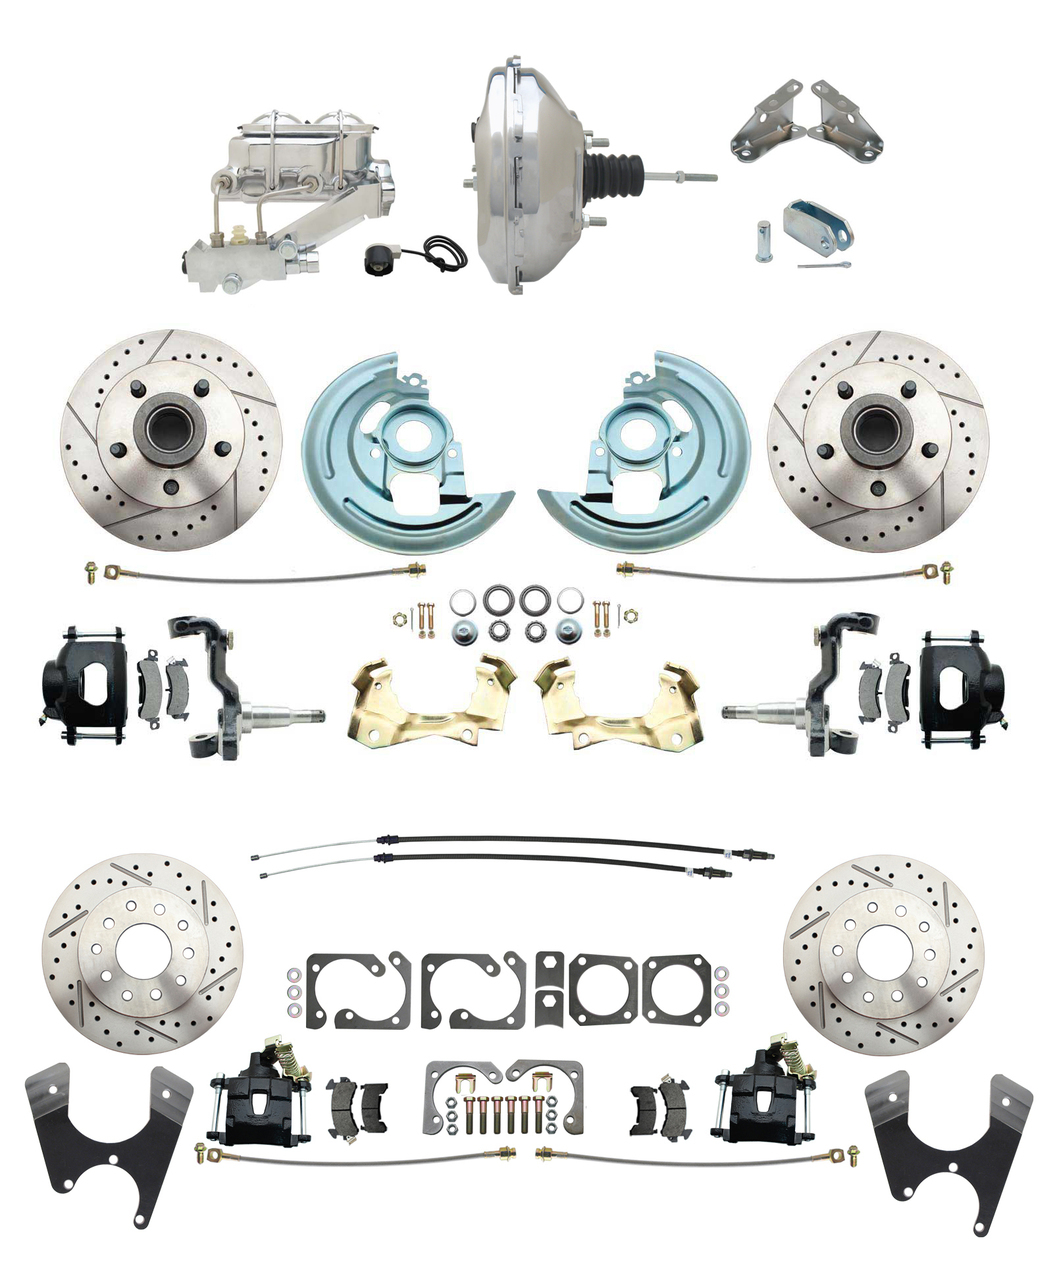 1967-1969 Camaro/ Firebird & 1968-1974 Chevy Nova Front & Rear Power Disc Brake Conversion Kit Drilled & Slotted & Powder Coated Black Calipers Rotors 11 Chrome Booster Kit